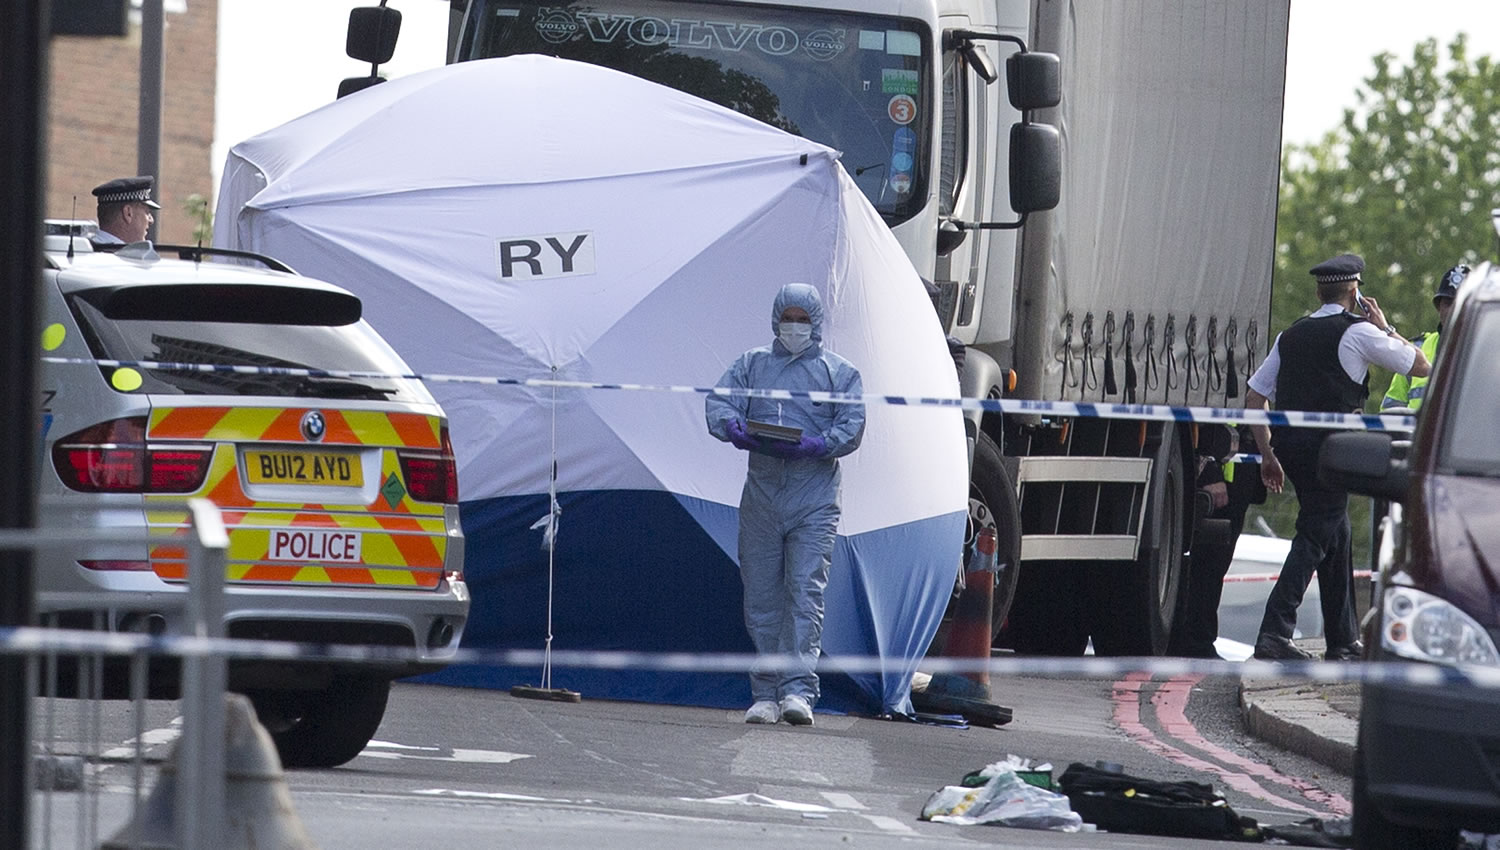 A tent is erected near the scene of an attack in Woolwich southeast London on Wednesday. A British official says a violent attack near a London barracks is being investigated as a possible terrorist act.